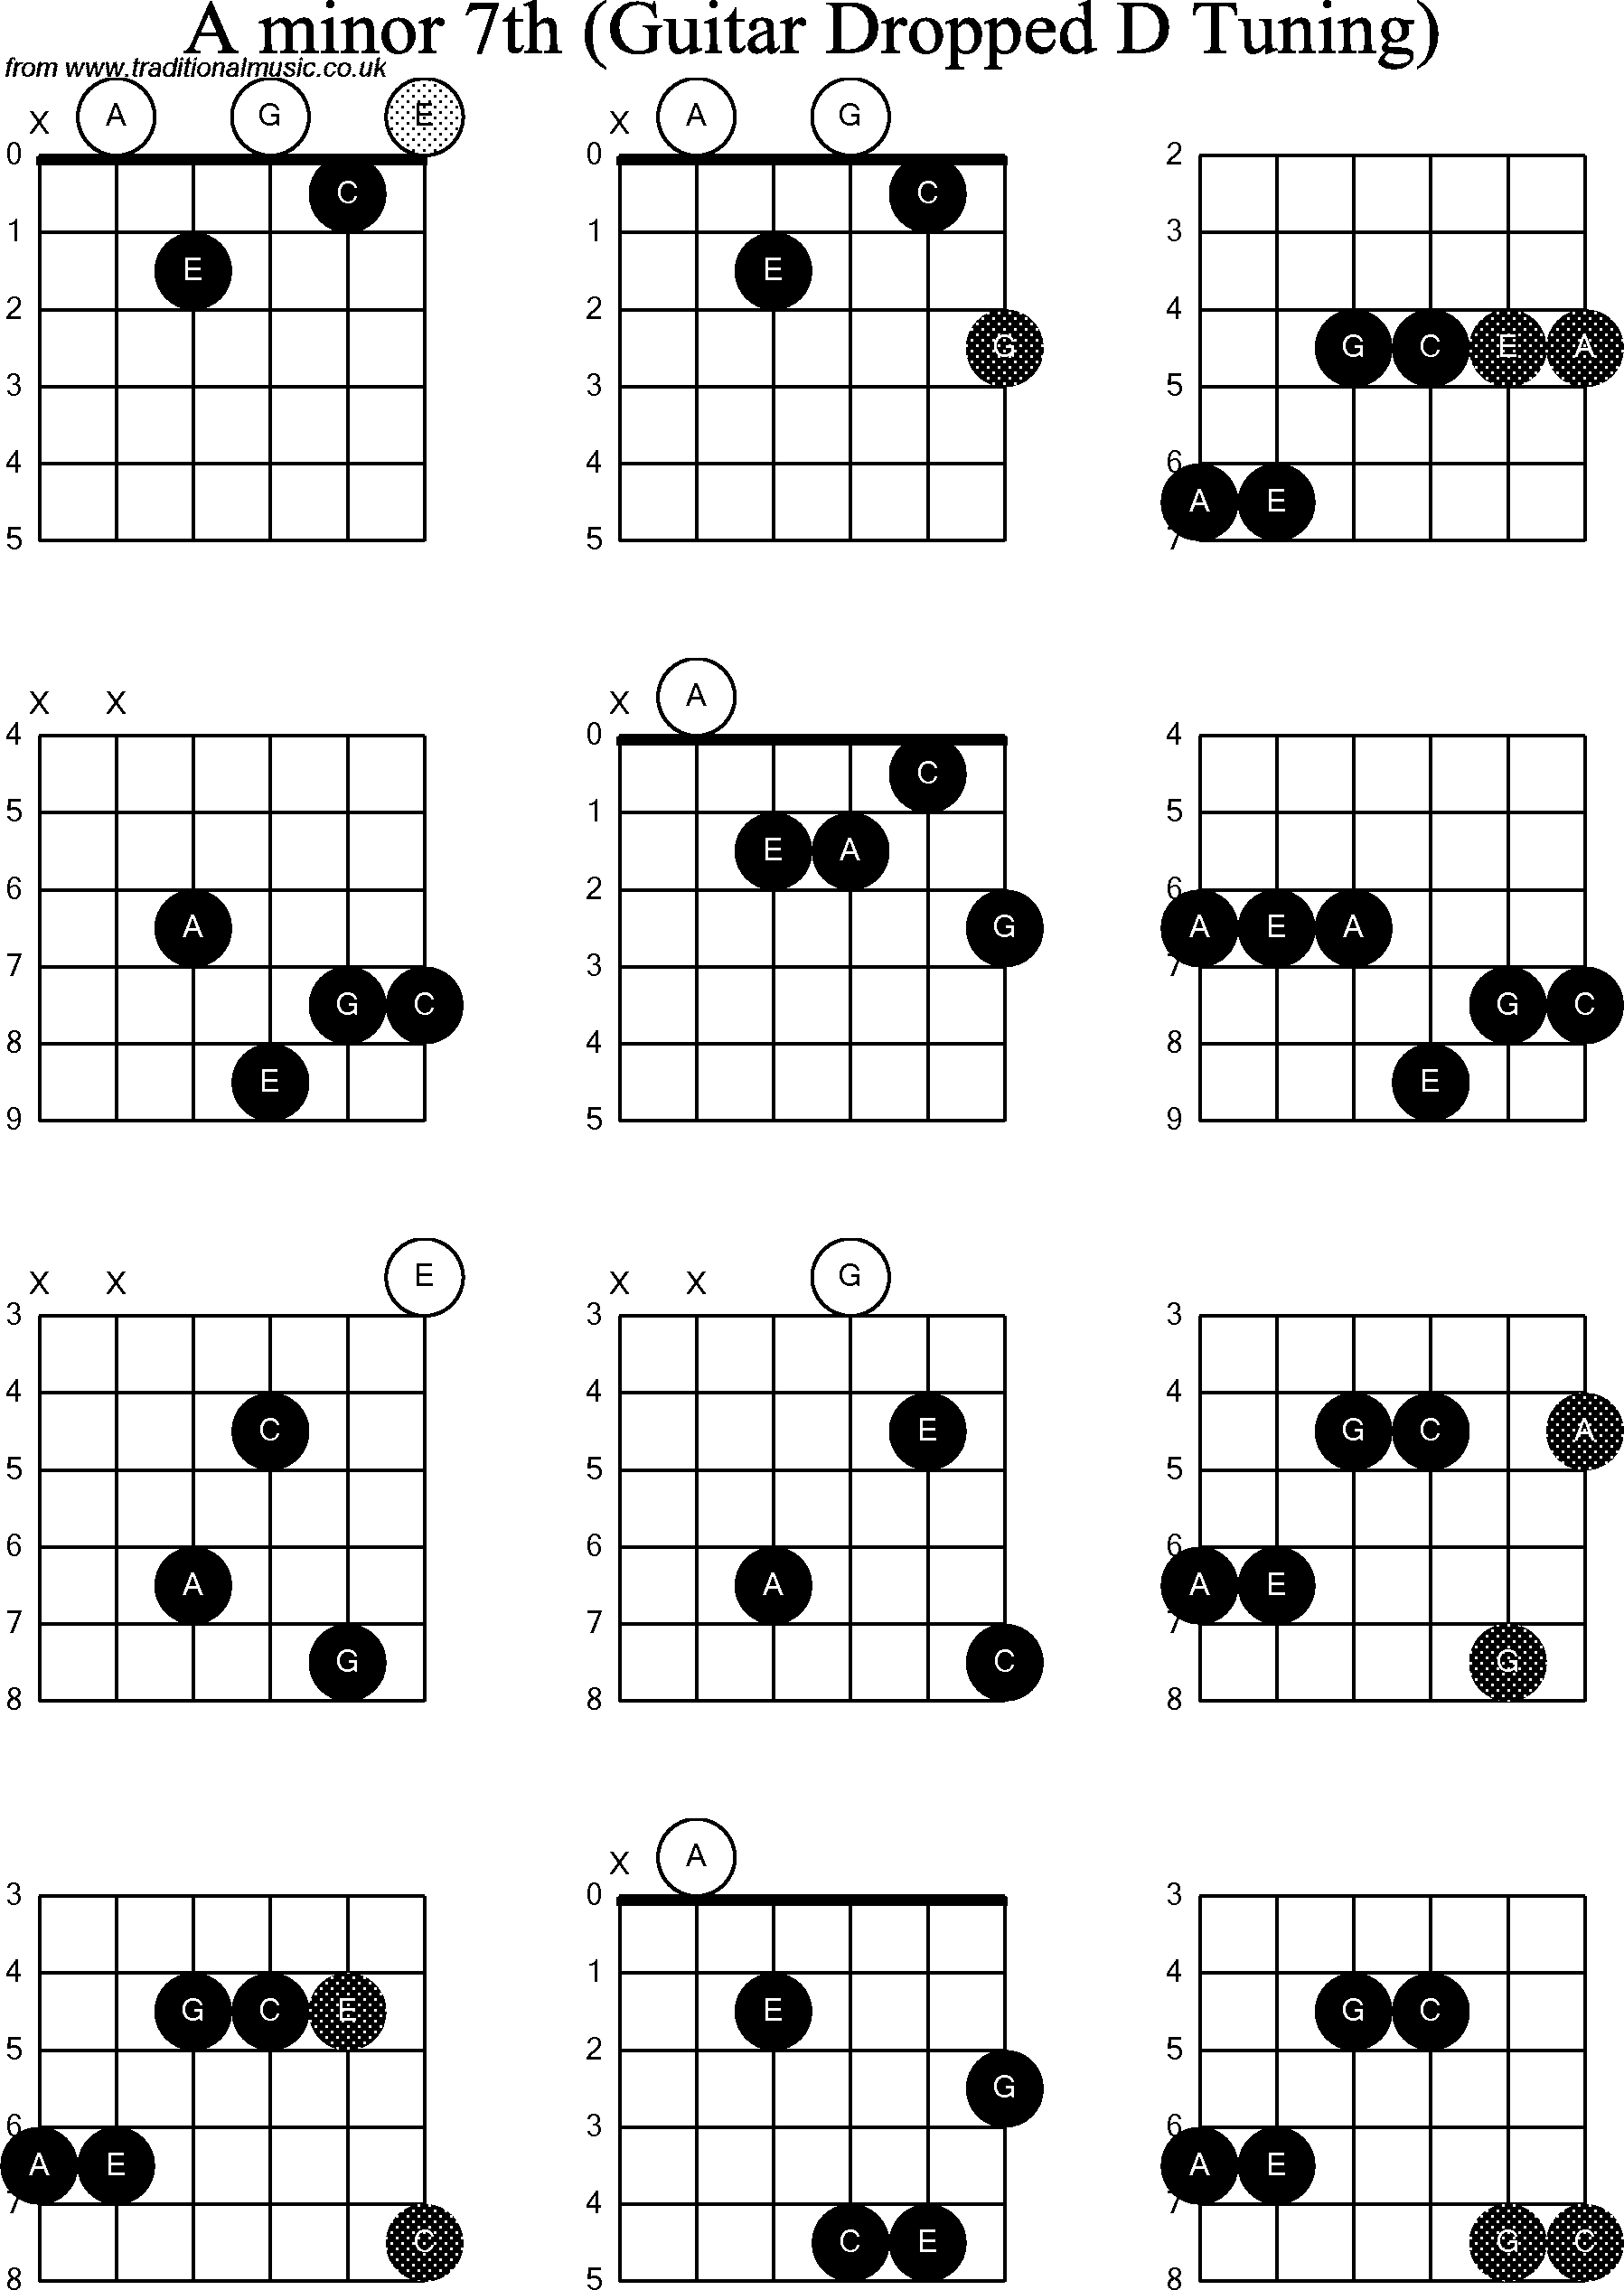 Chord diagrams for dropped D Guitar(DADGBE), A Minor7th